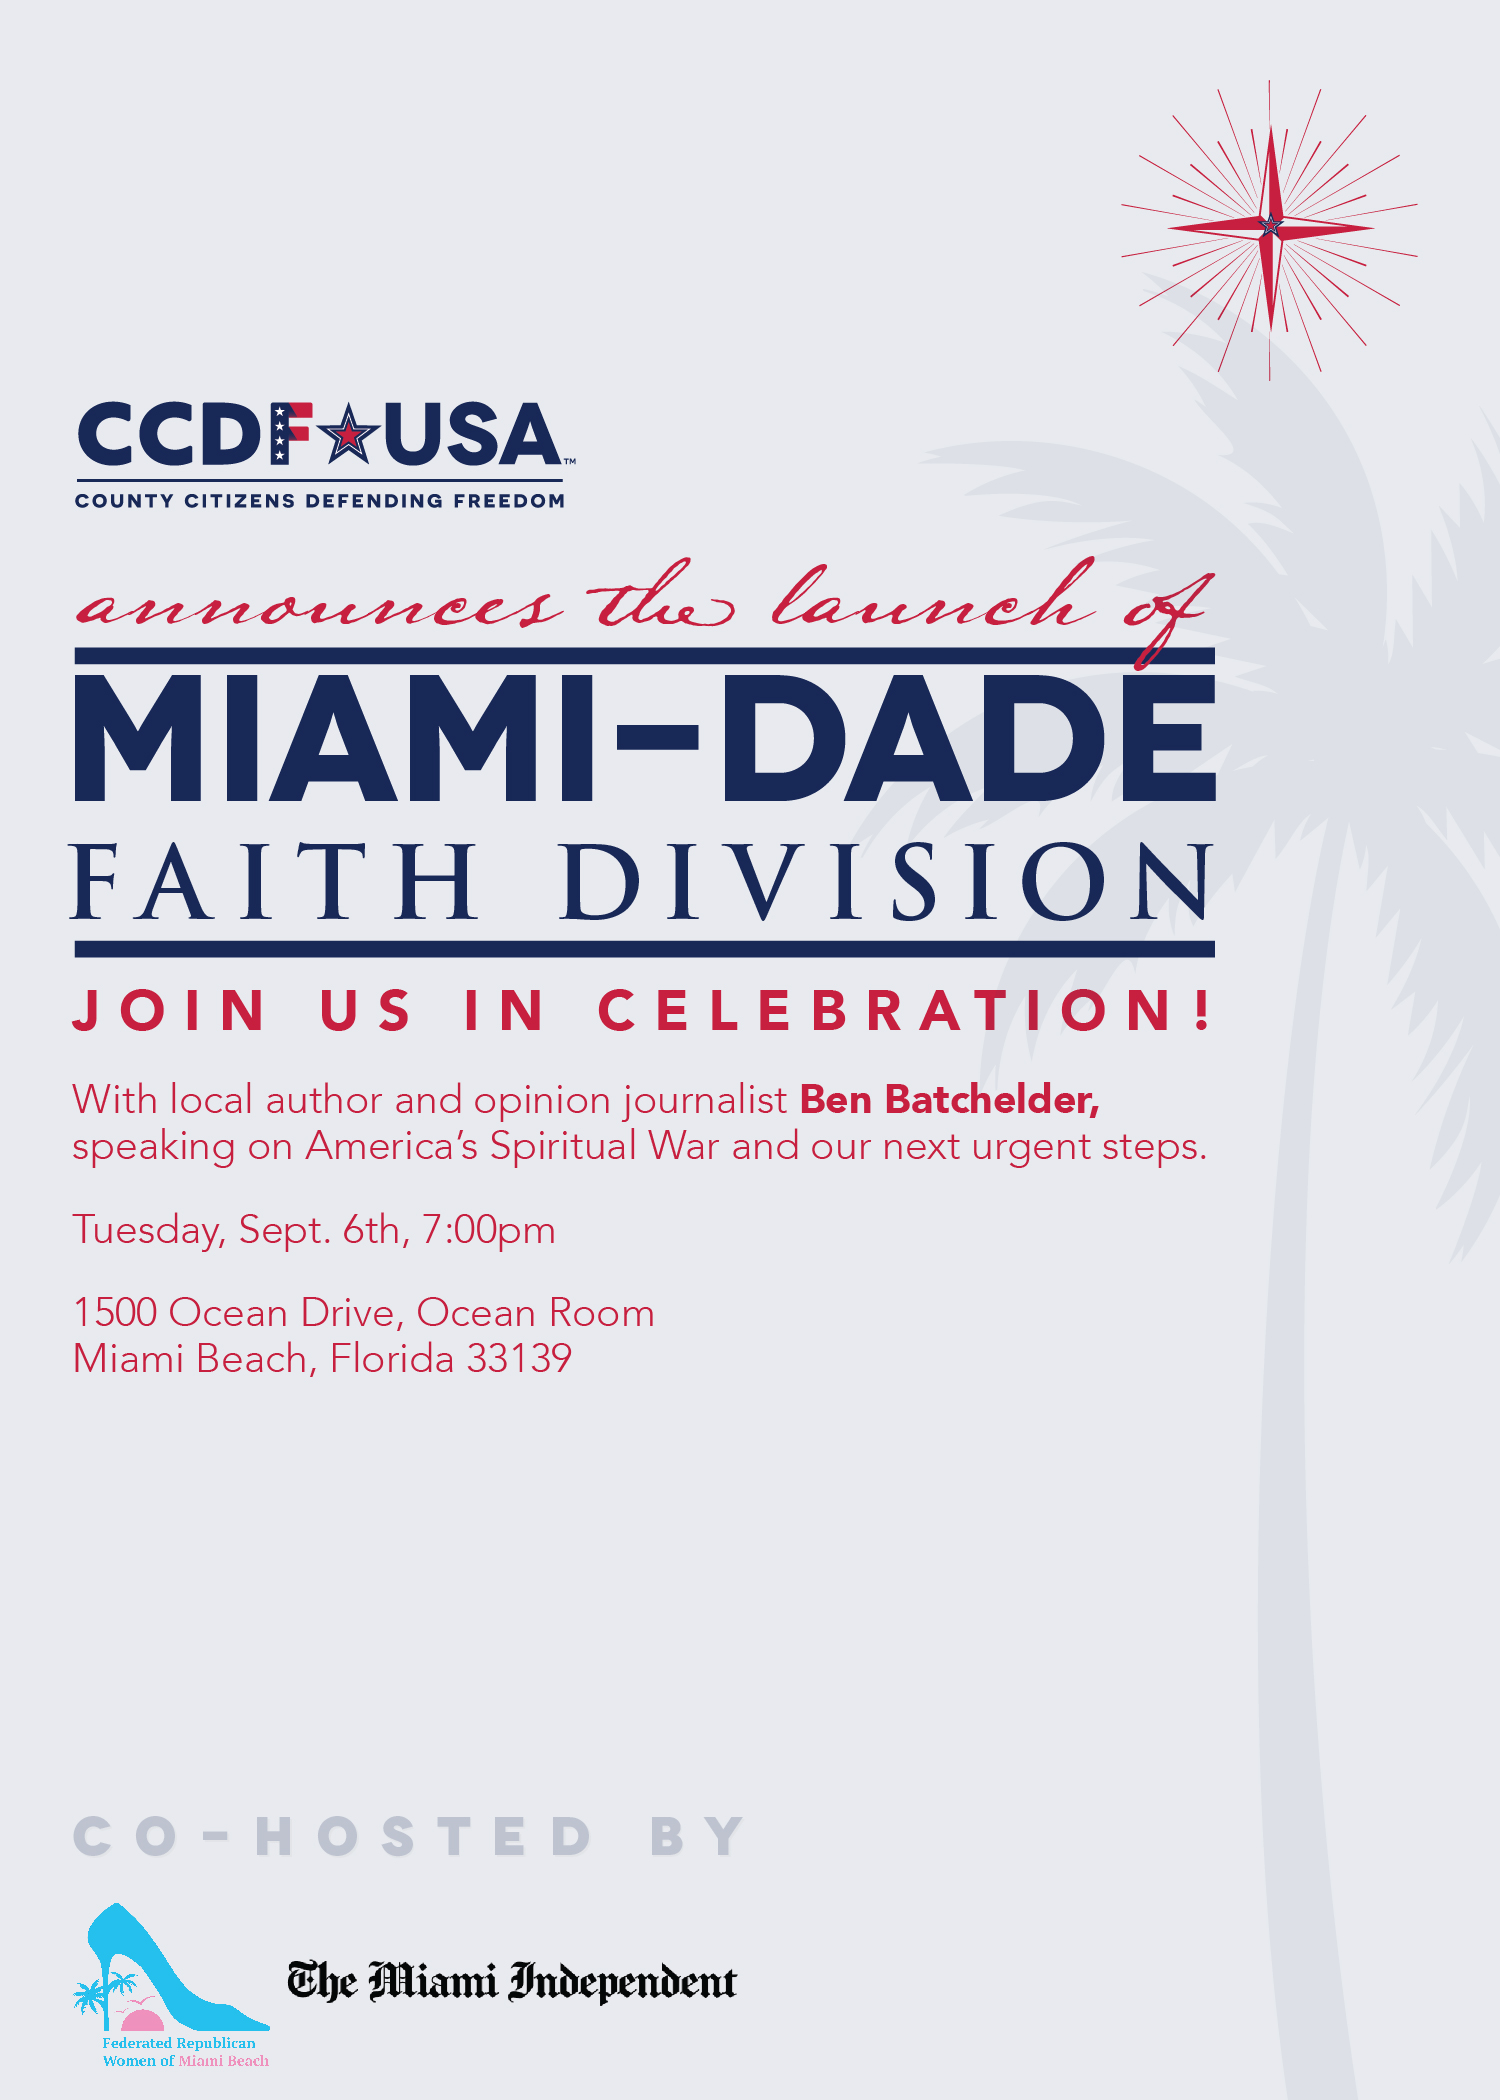 CCDF/Miami Independent Launch Party - RSVP!